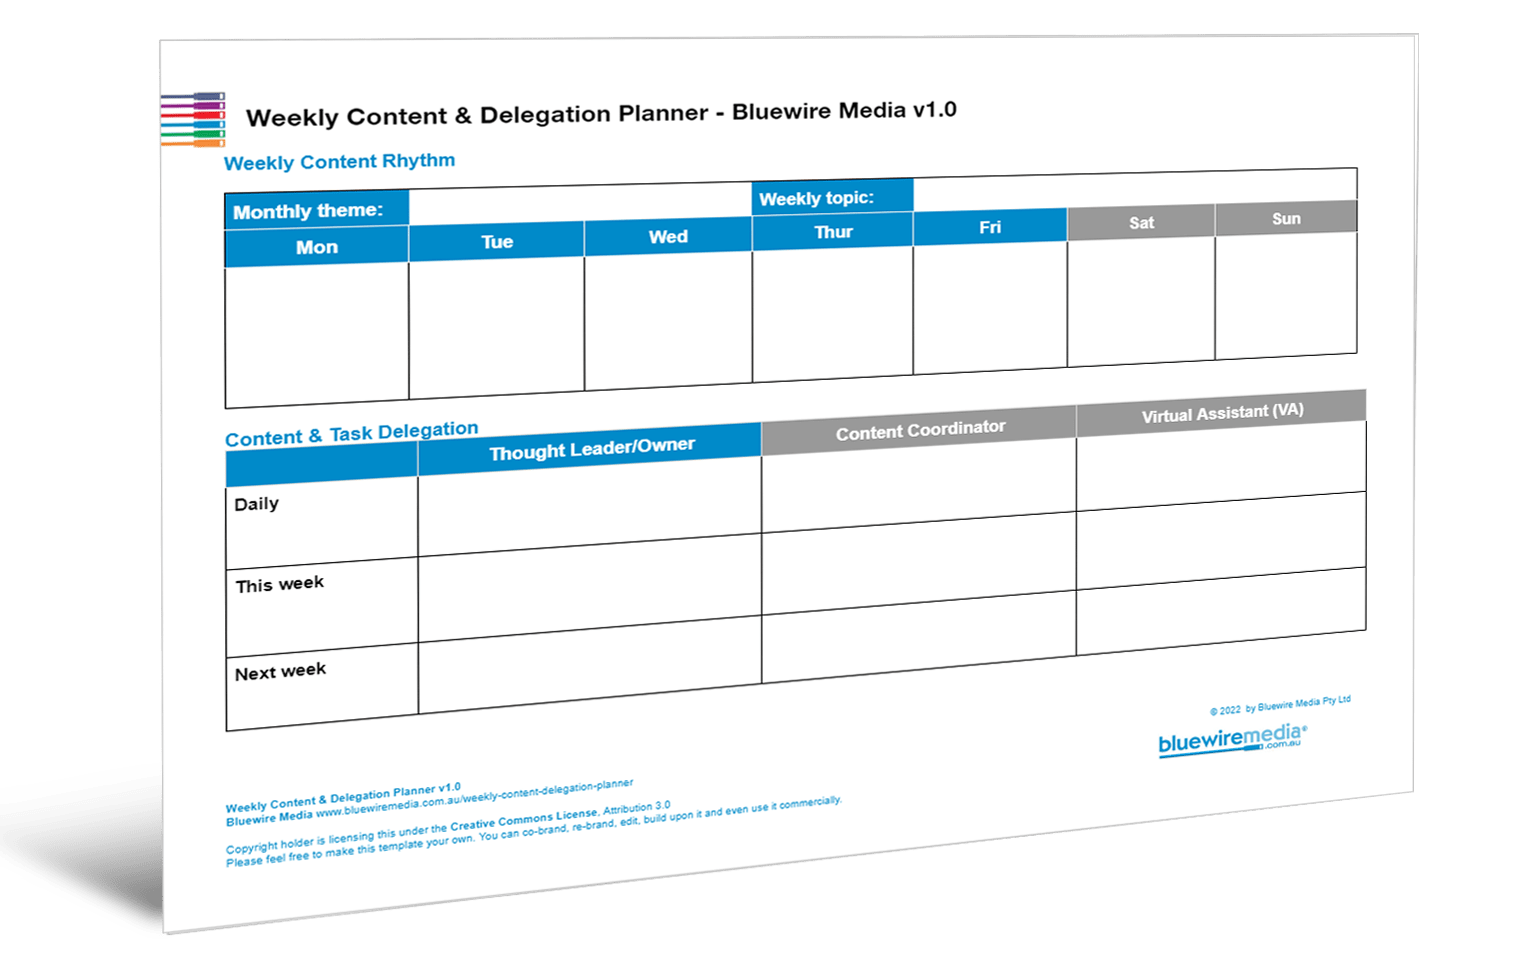 Weekly Content & Delegation Planner